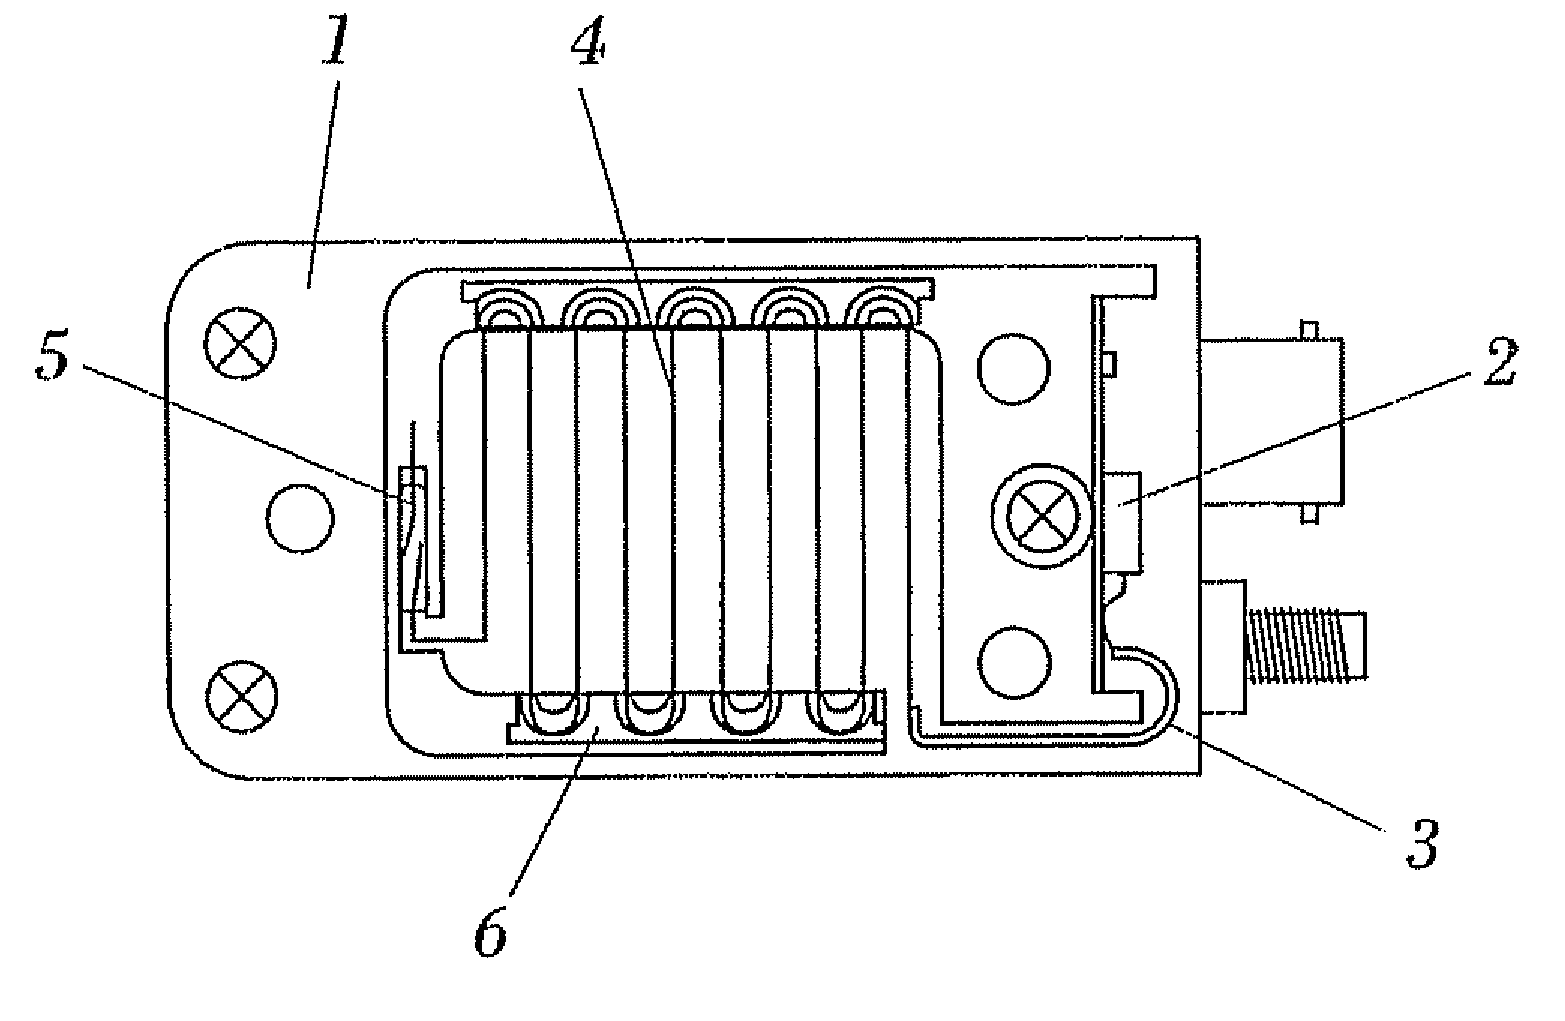 Heater module for the admission gases of an automobile engine with an overheating protection and/or closed-loop regulation